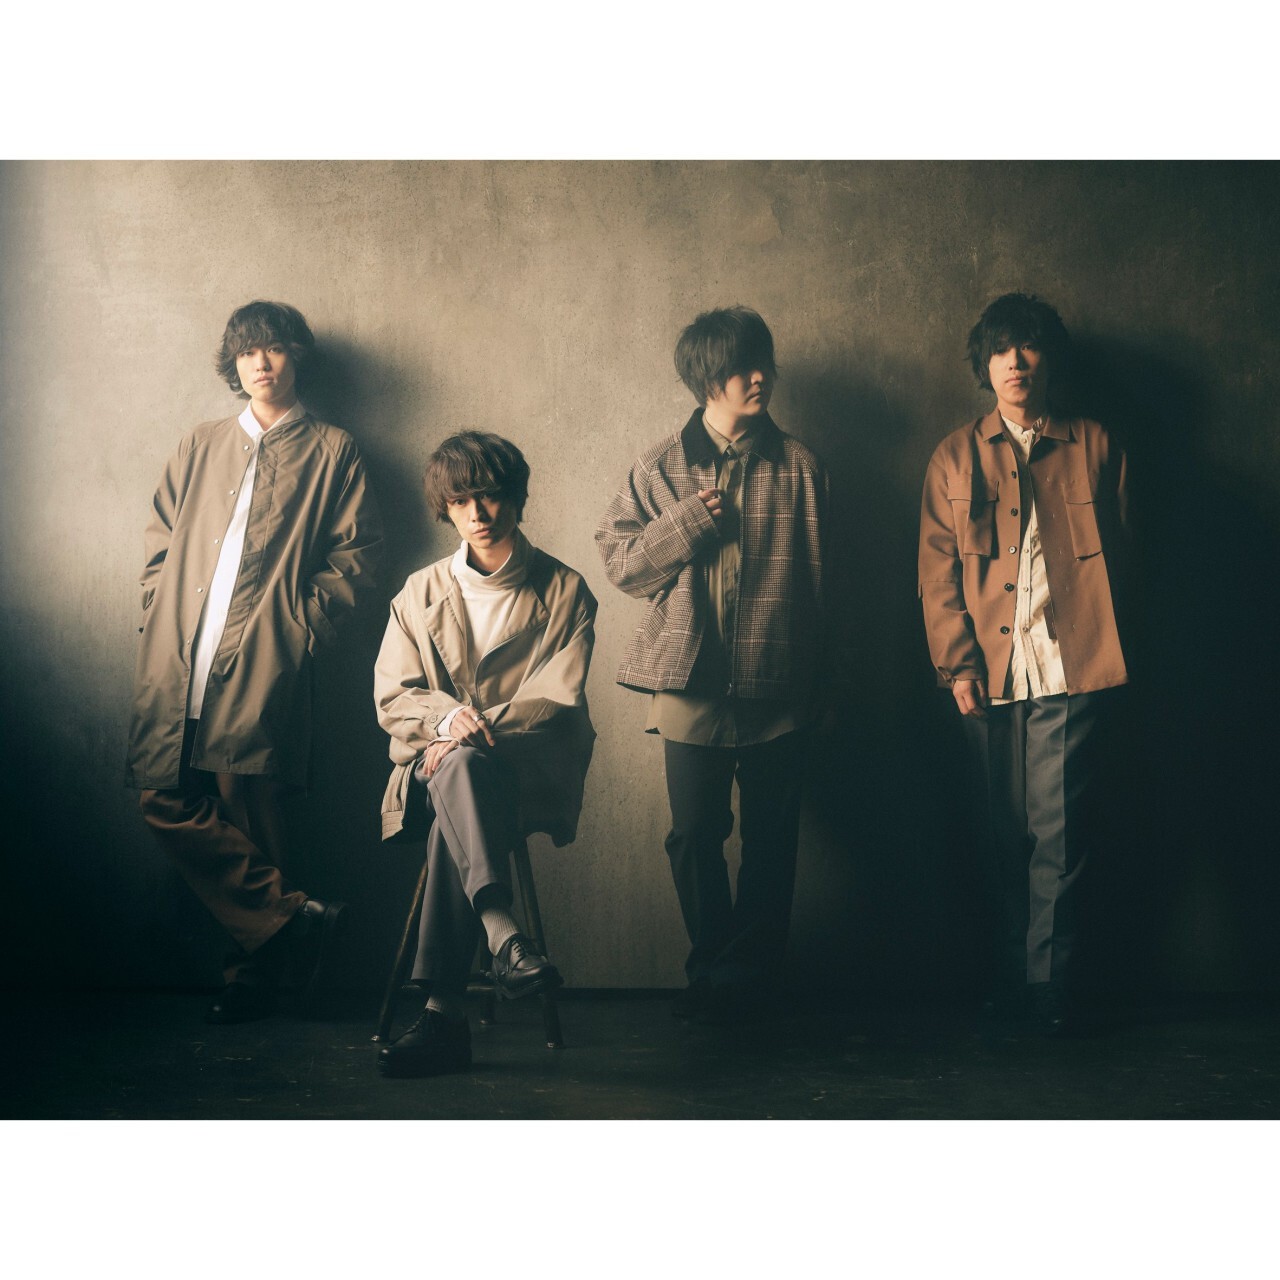 mol-74「Answers」release tour Zepp Divercity ローチケ LIVE STREAMING